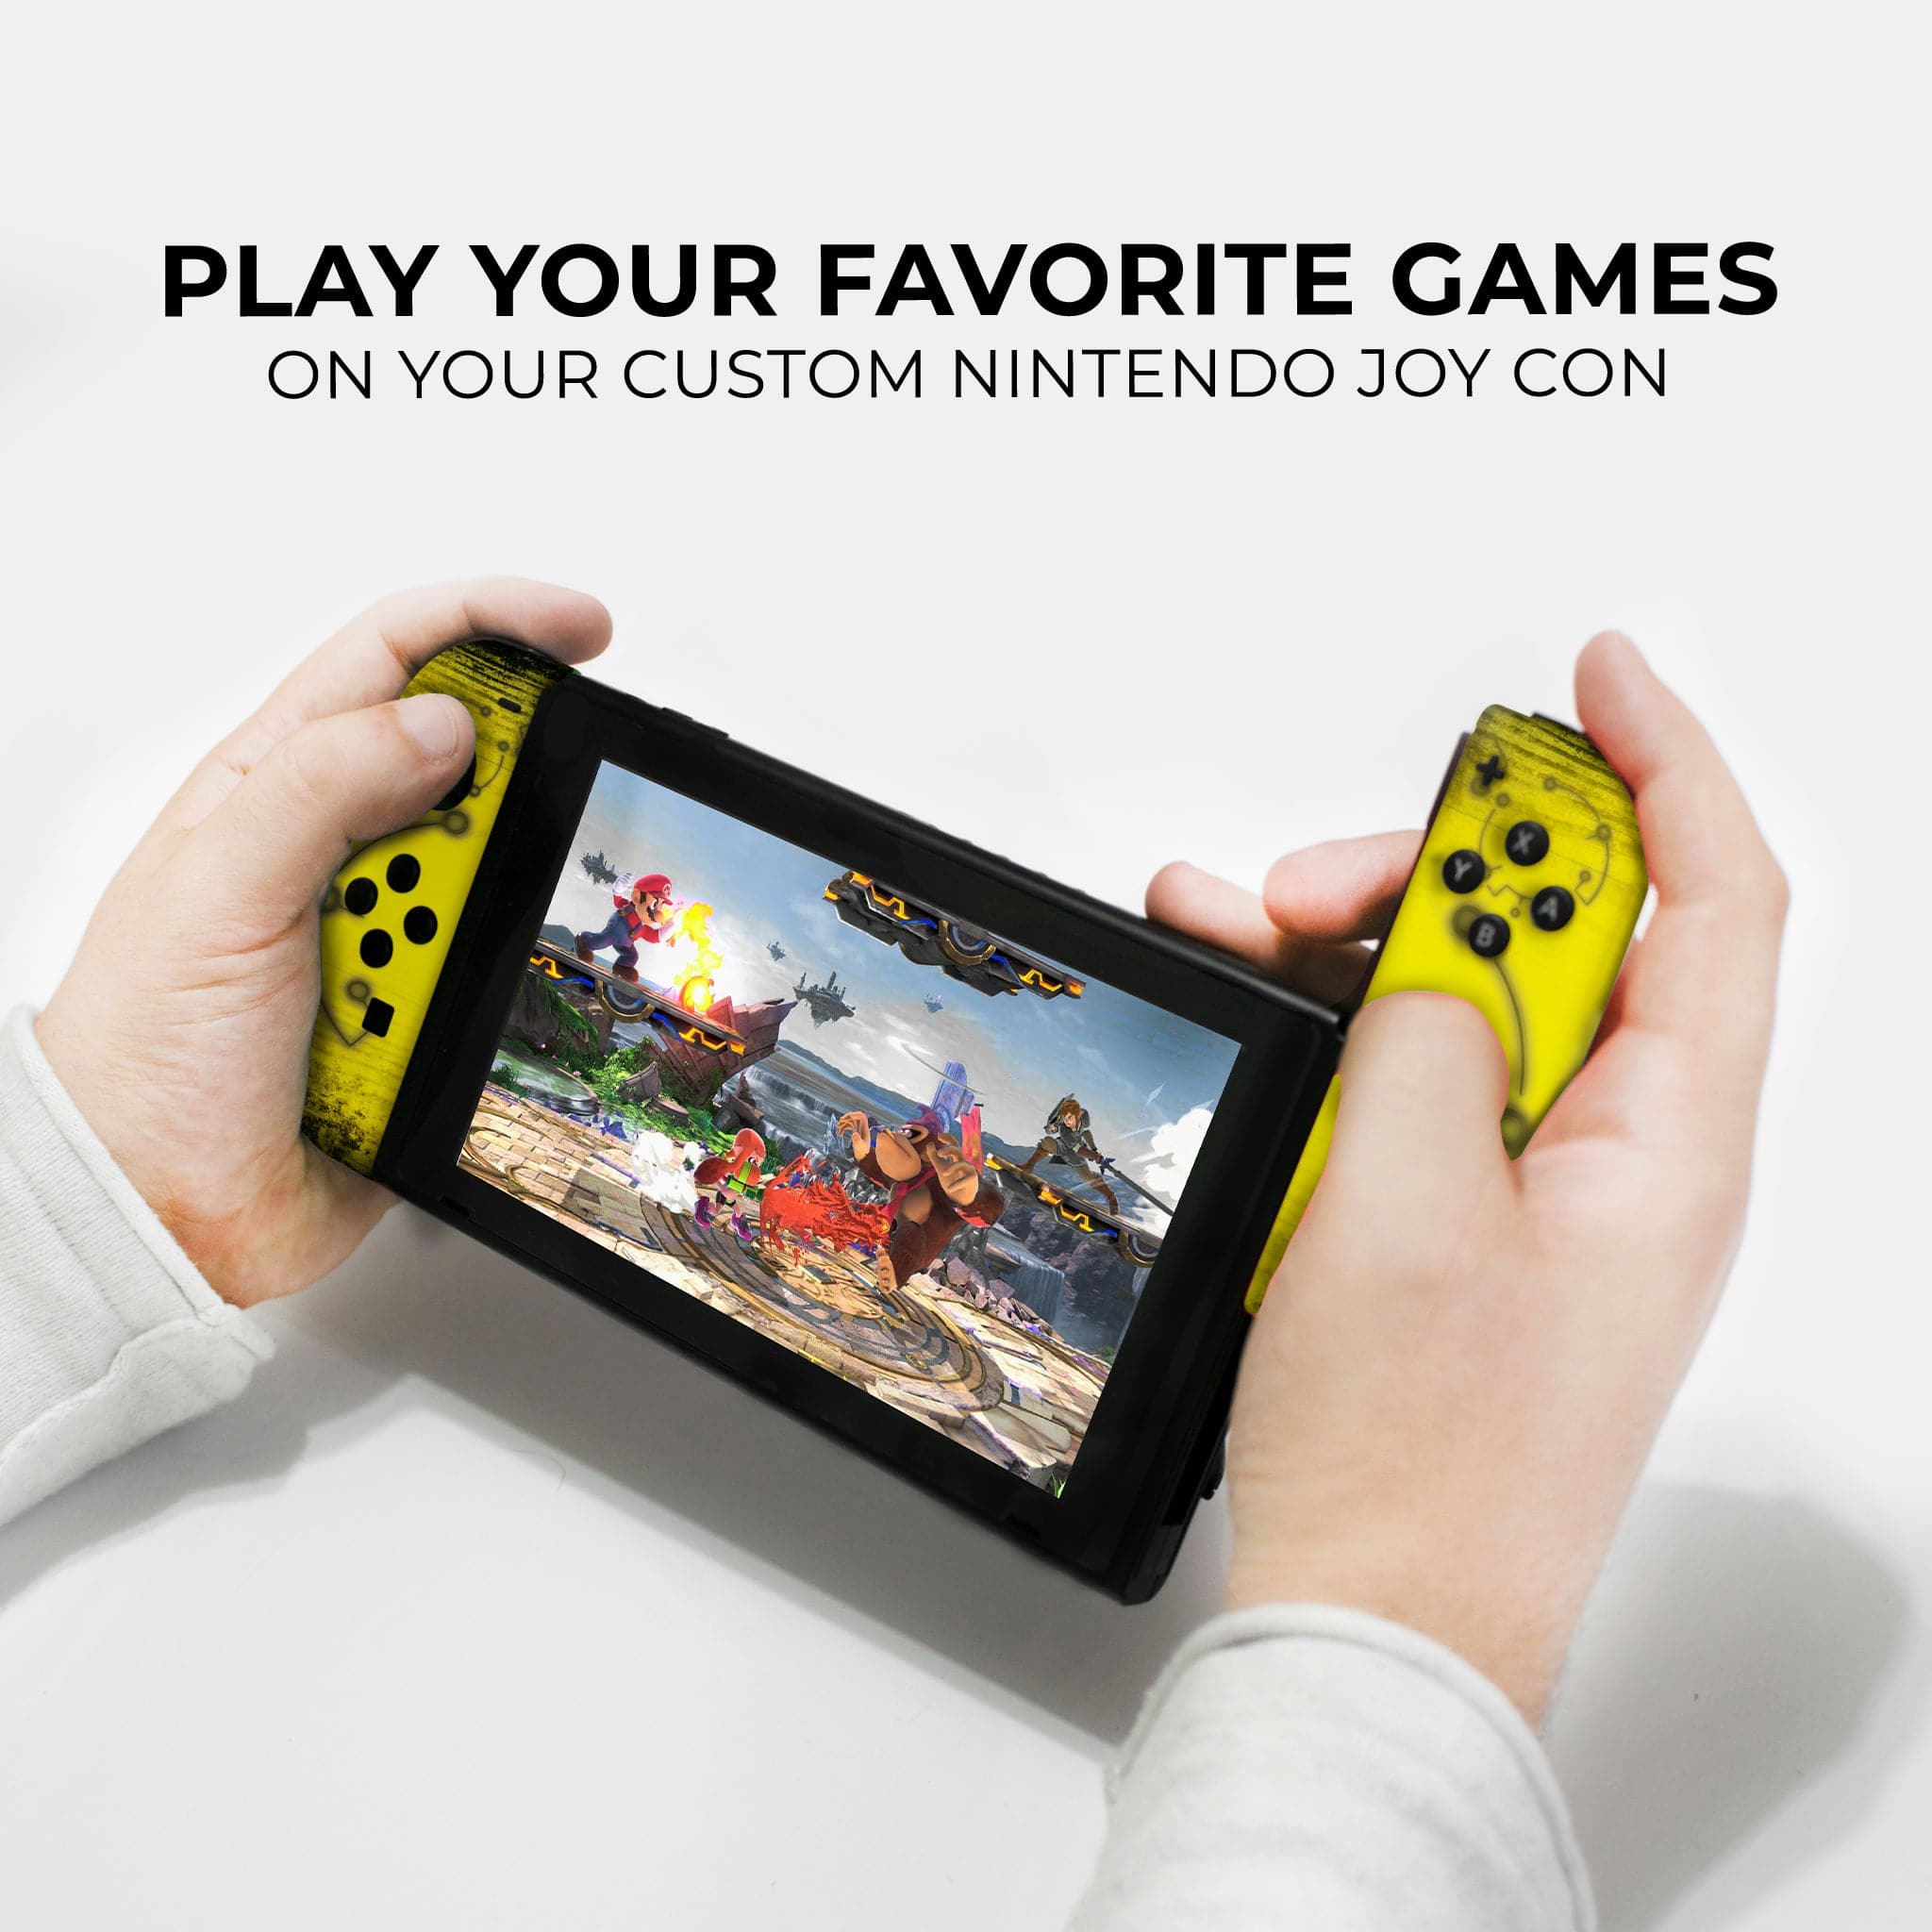 Zelda Inspired Nintendo Switch Joy-Con Left and Right Switch Controllers by Nintendo